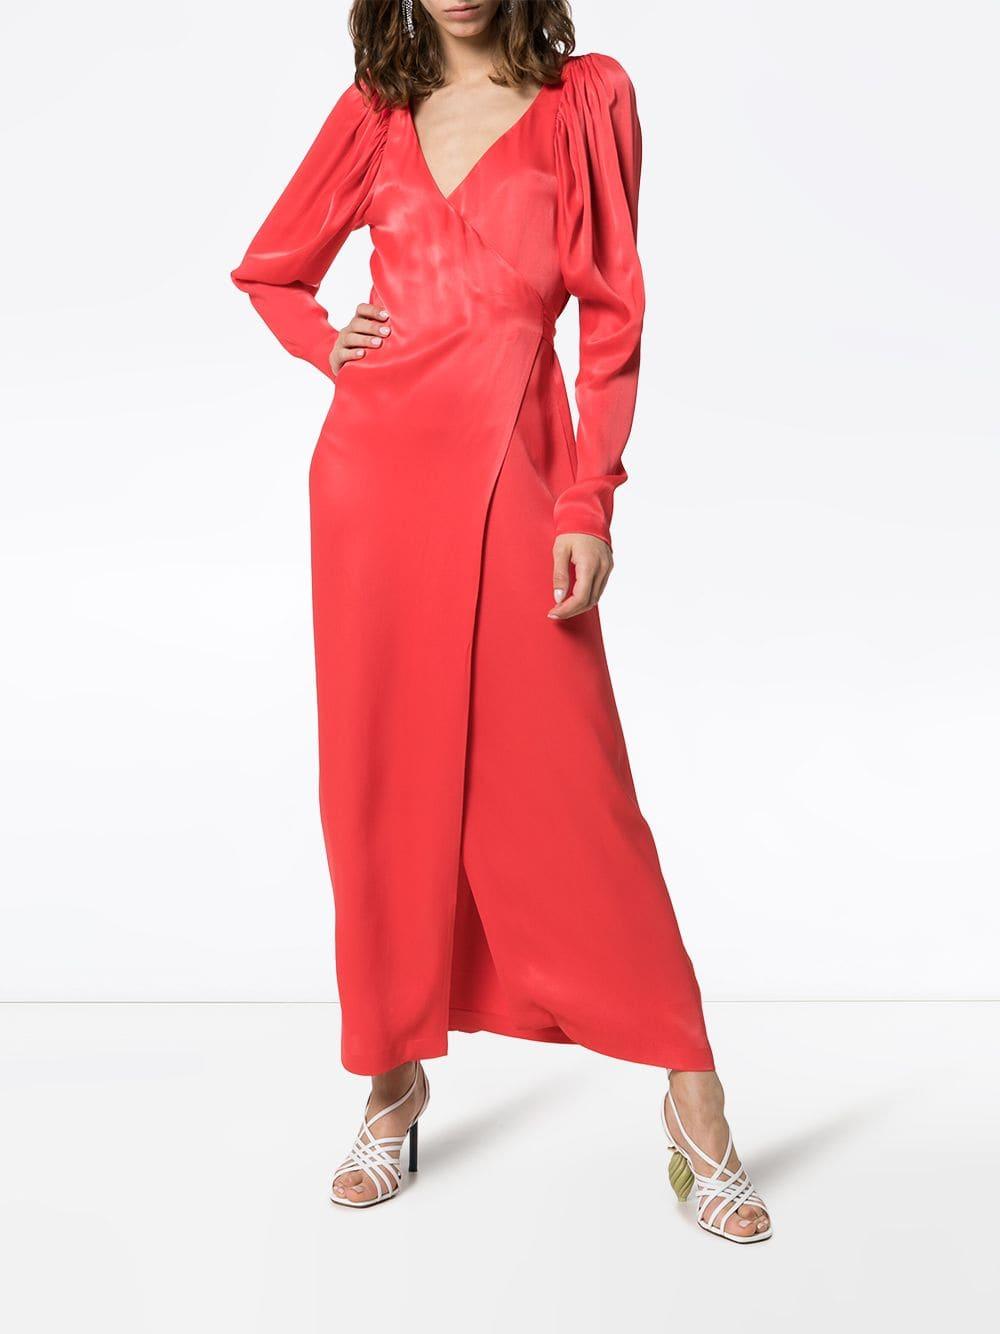 ROTATE BIRGER CHRISTENSEN Synthetic V-neck Tie Waist Wrap Dress in Red -  Lyst